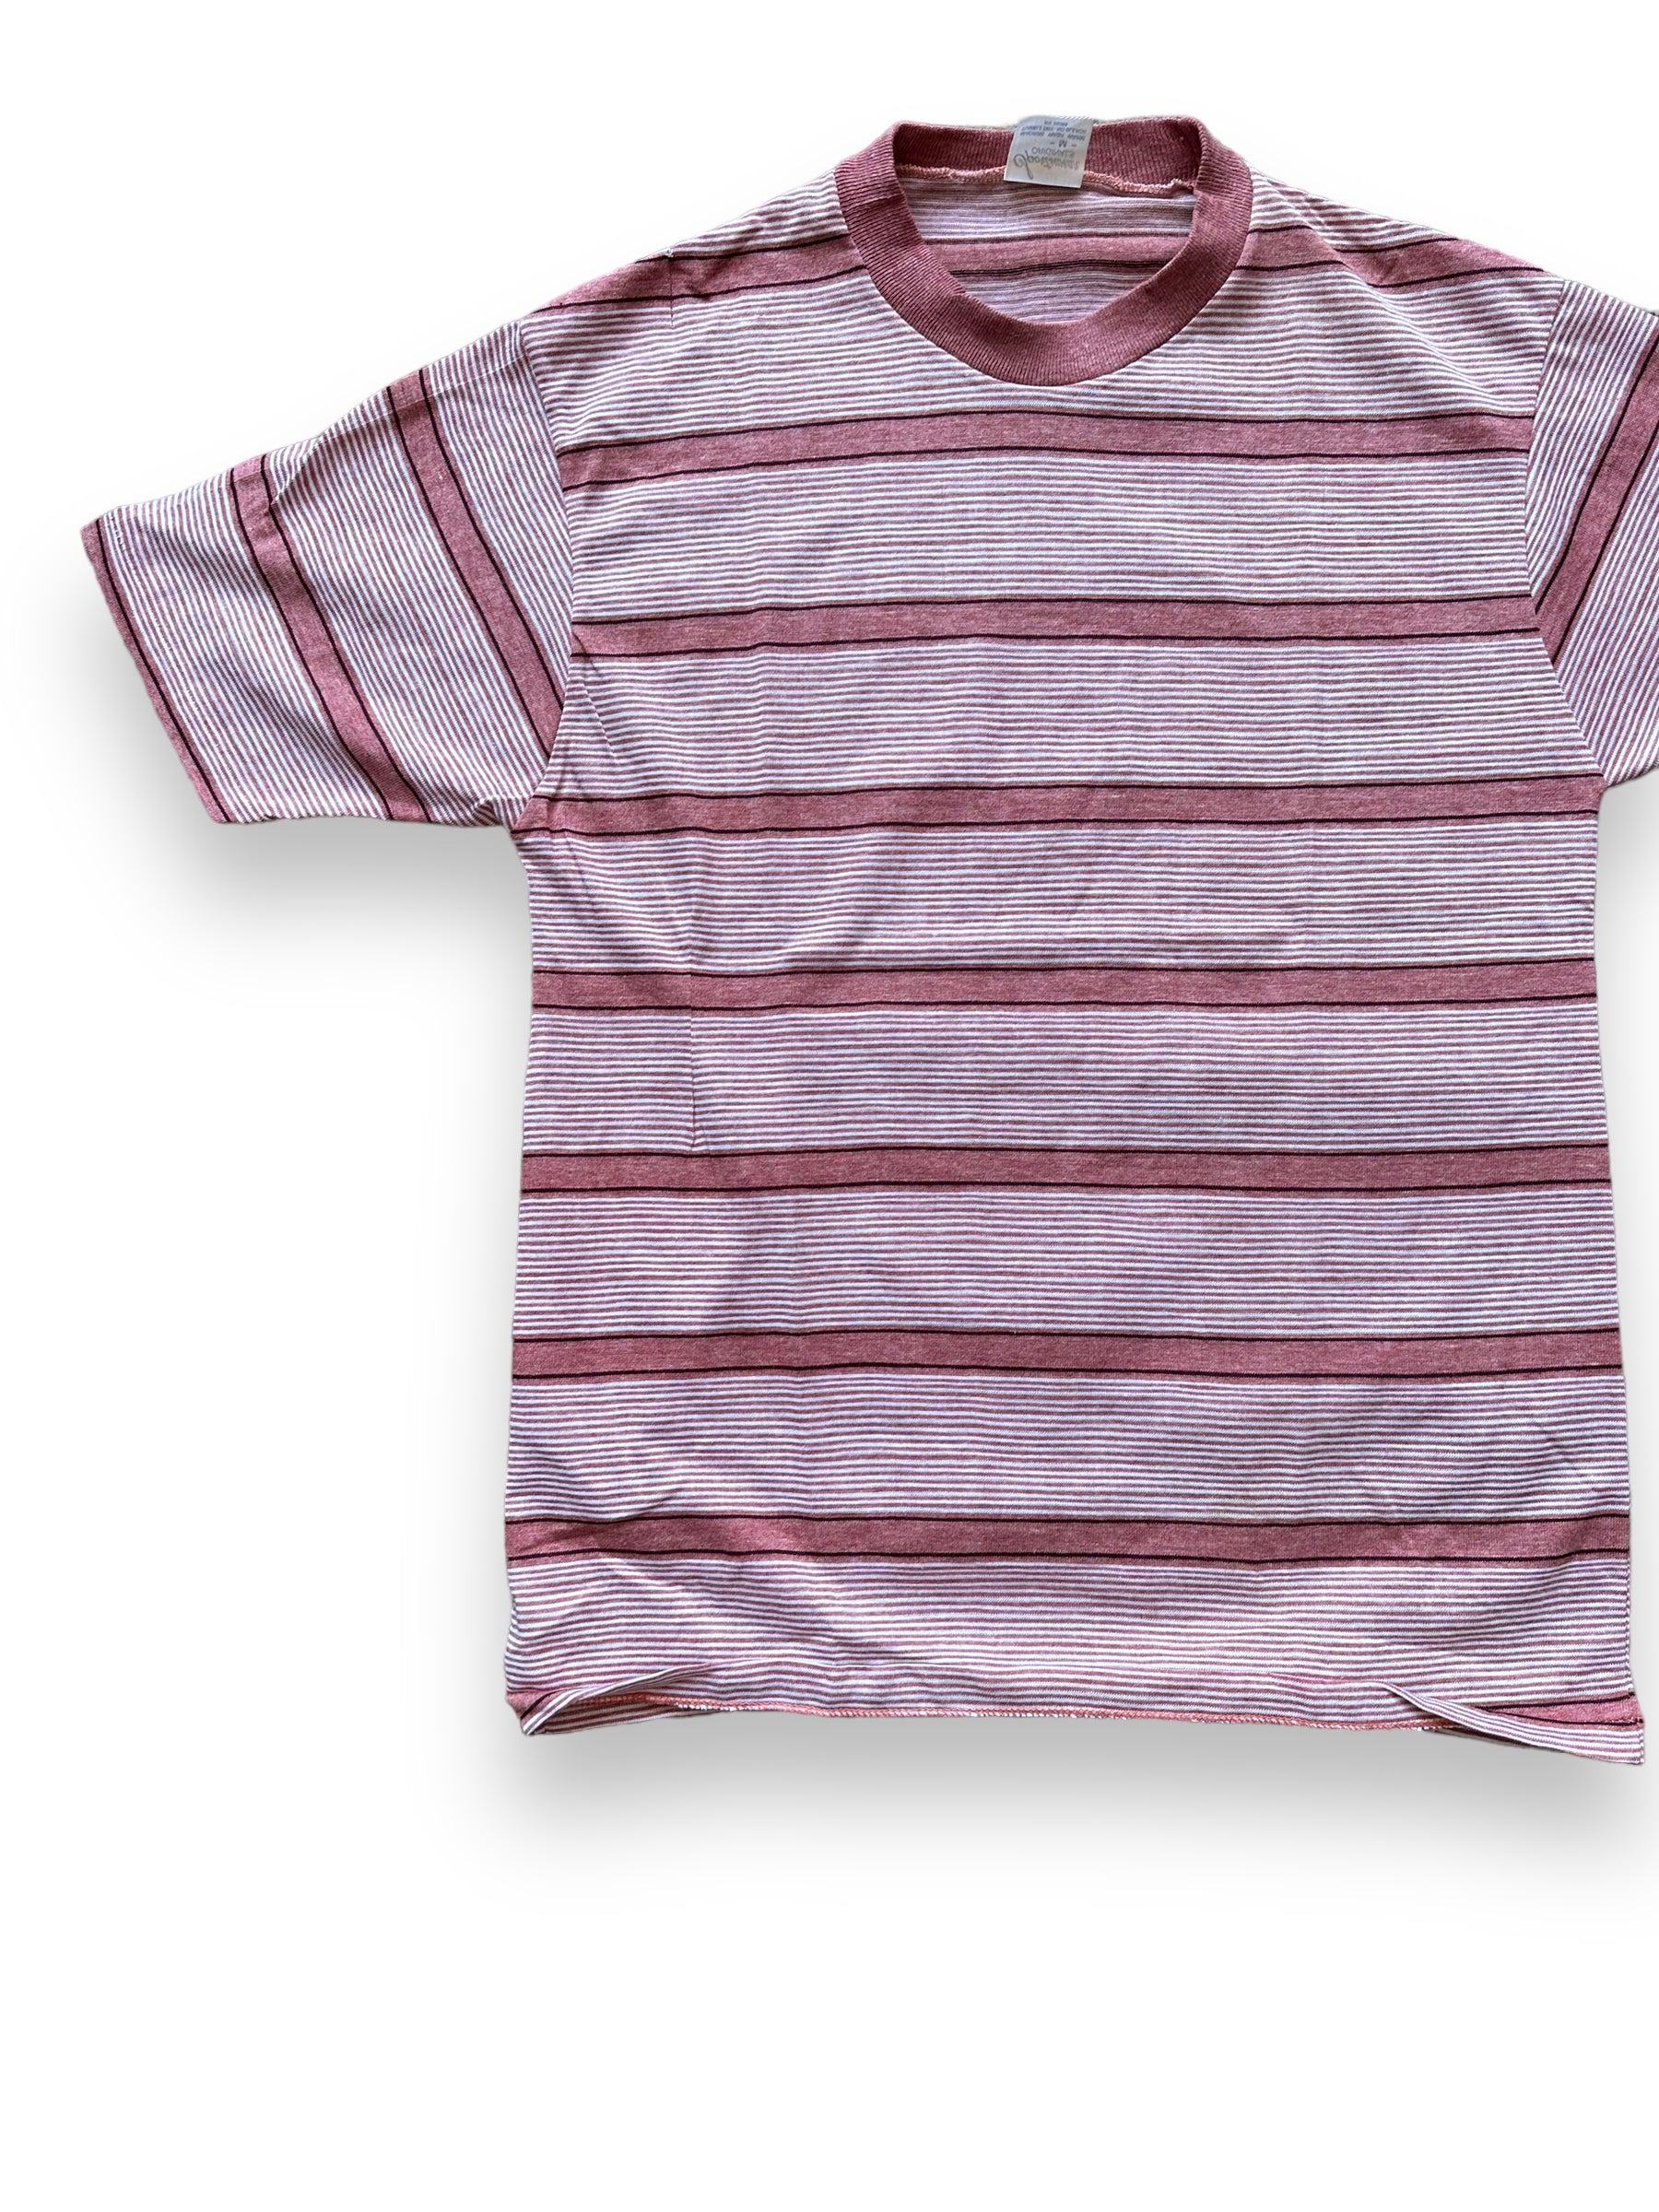 Front Right View of Vintage New Old Stock Sportswear Originals Striped Tee SZ M | Vintage Striped Shirts Seattle | Barn Owl Vintage Tees Seattle